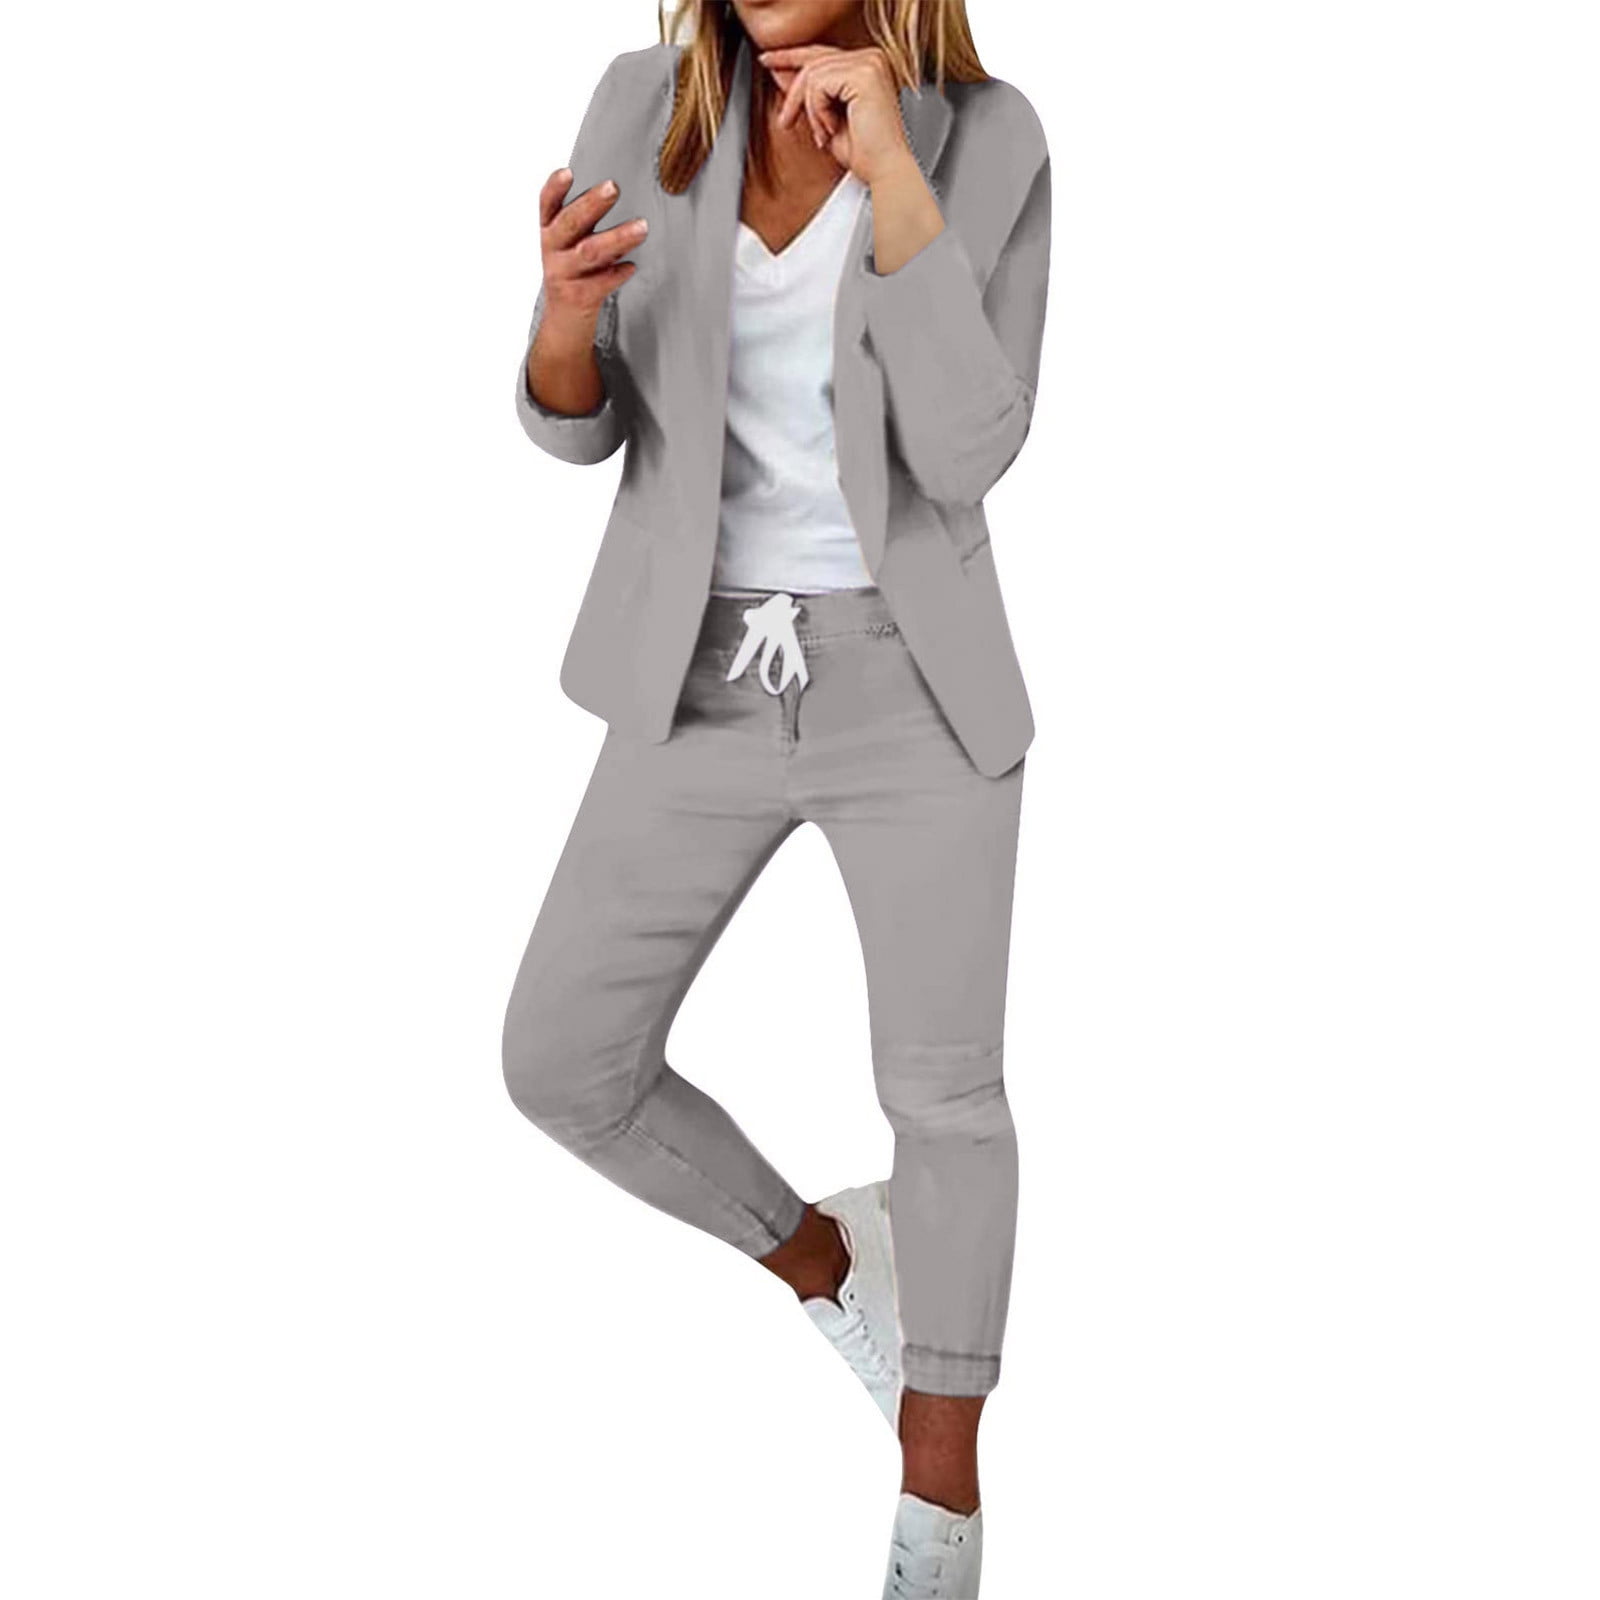 JGGSPWM Womens Business Work Suit Set Open Front Blazer and